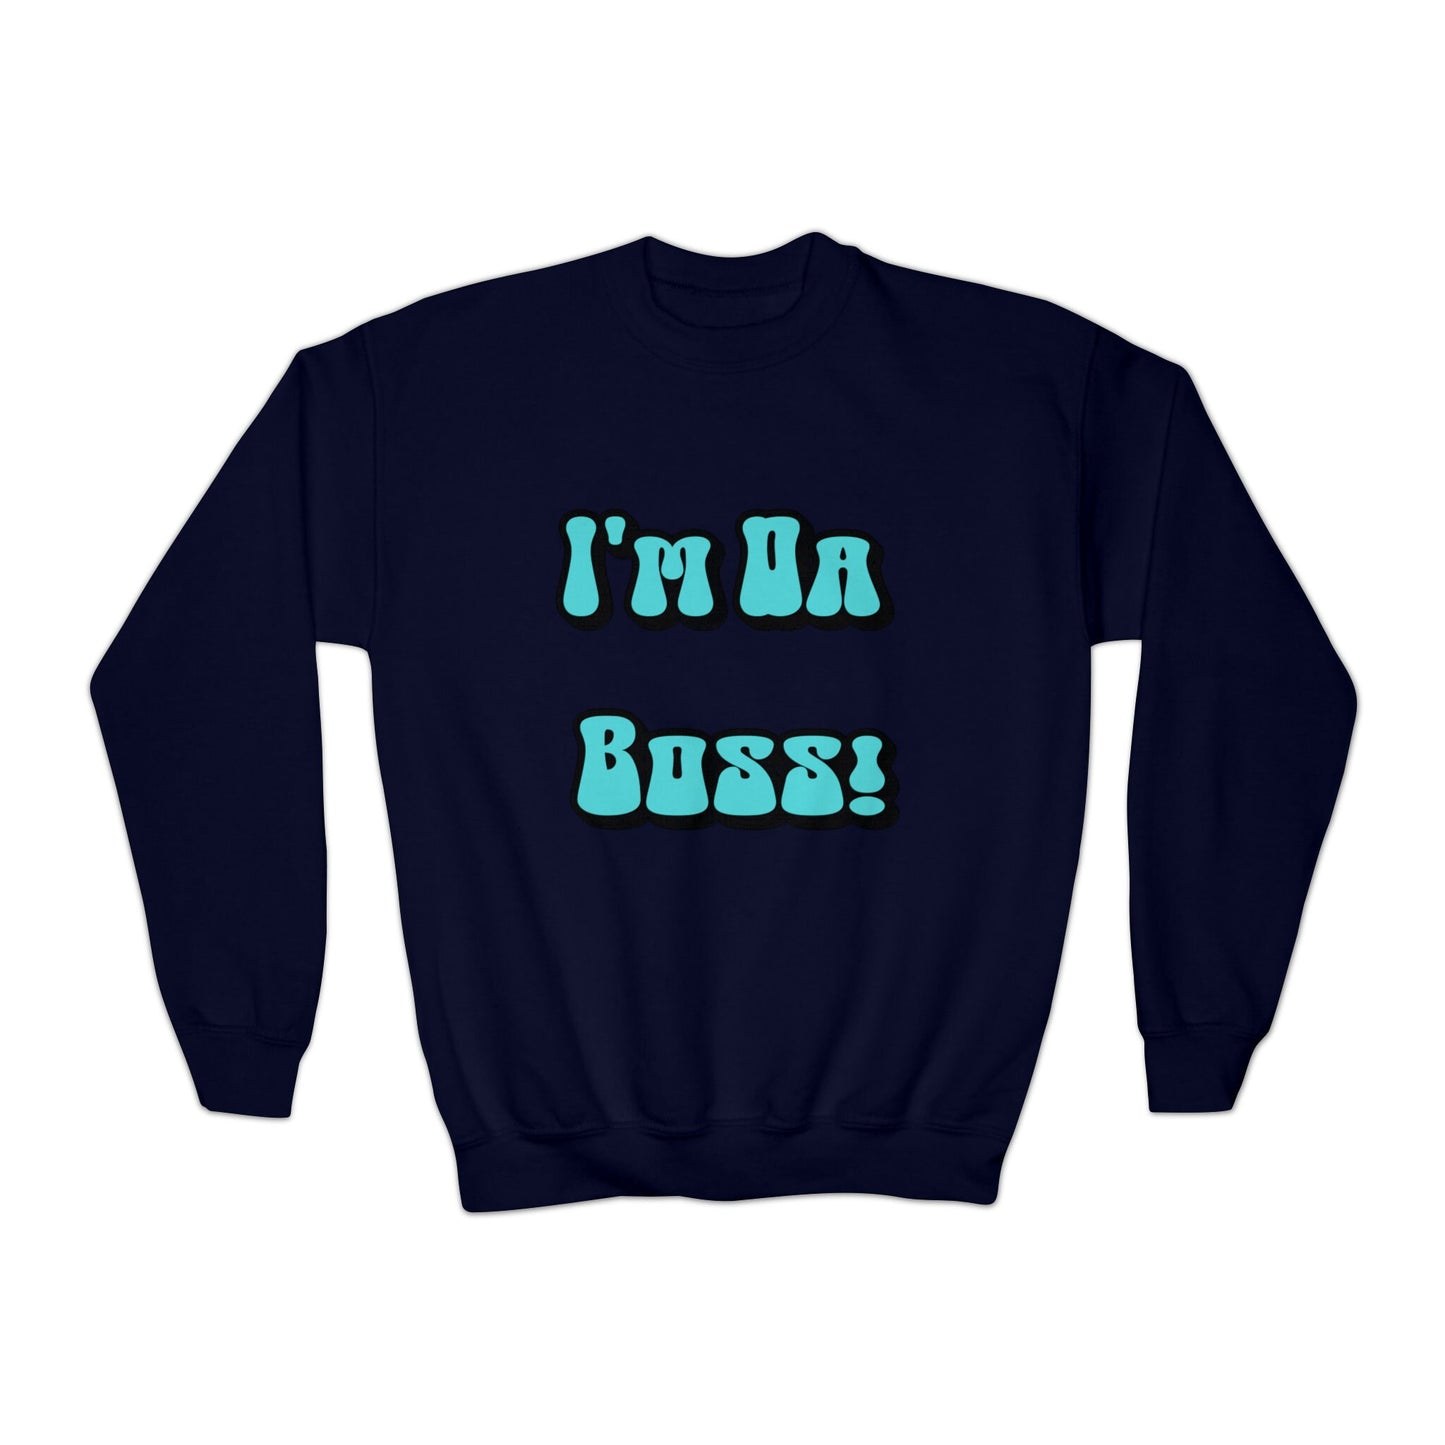 Kids Rule With This 'I Am The Boss' Crewneck Sweatshirt